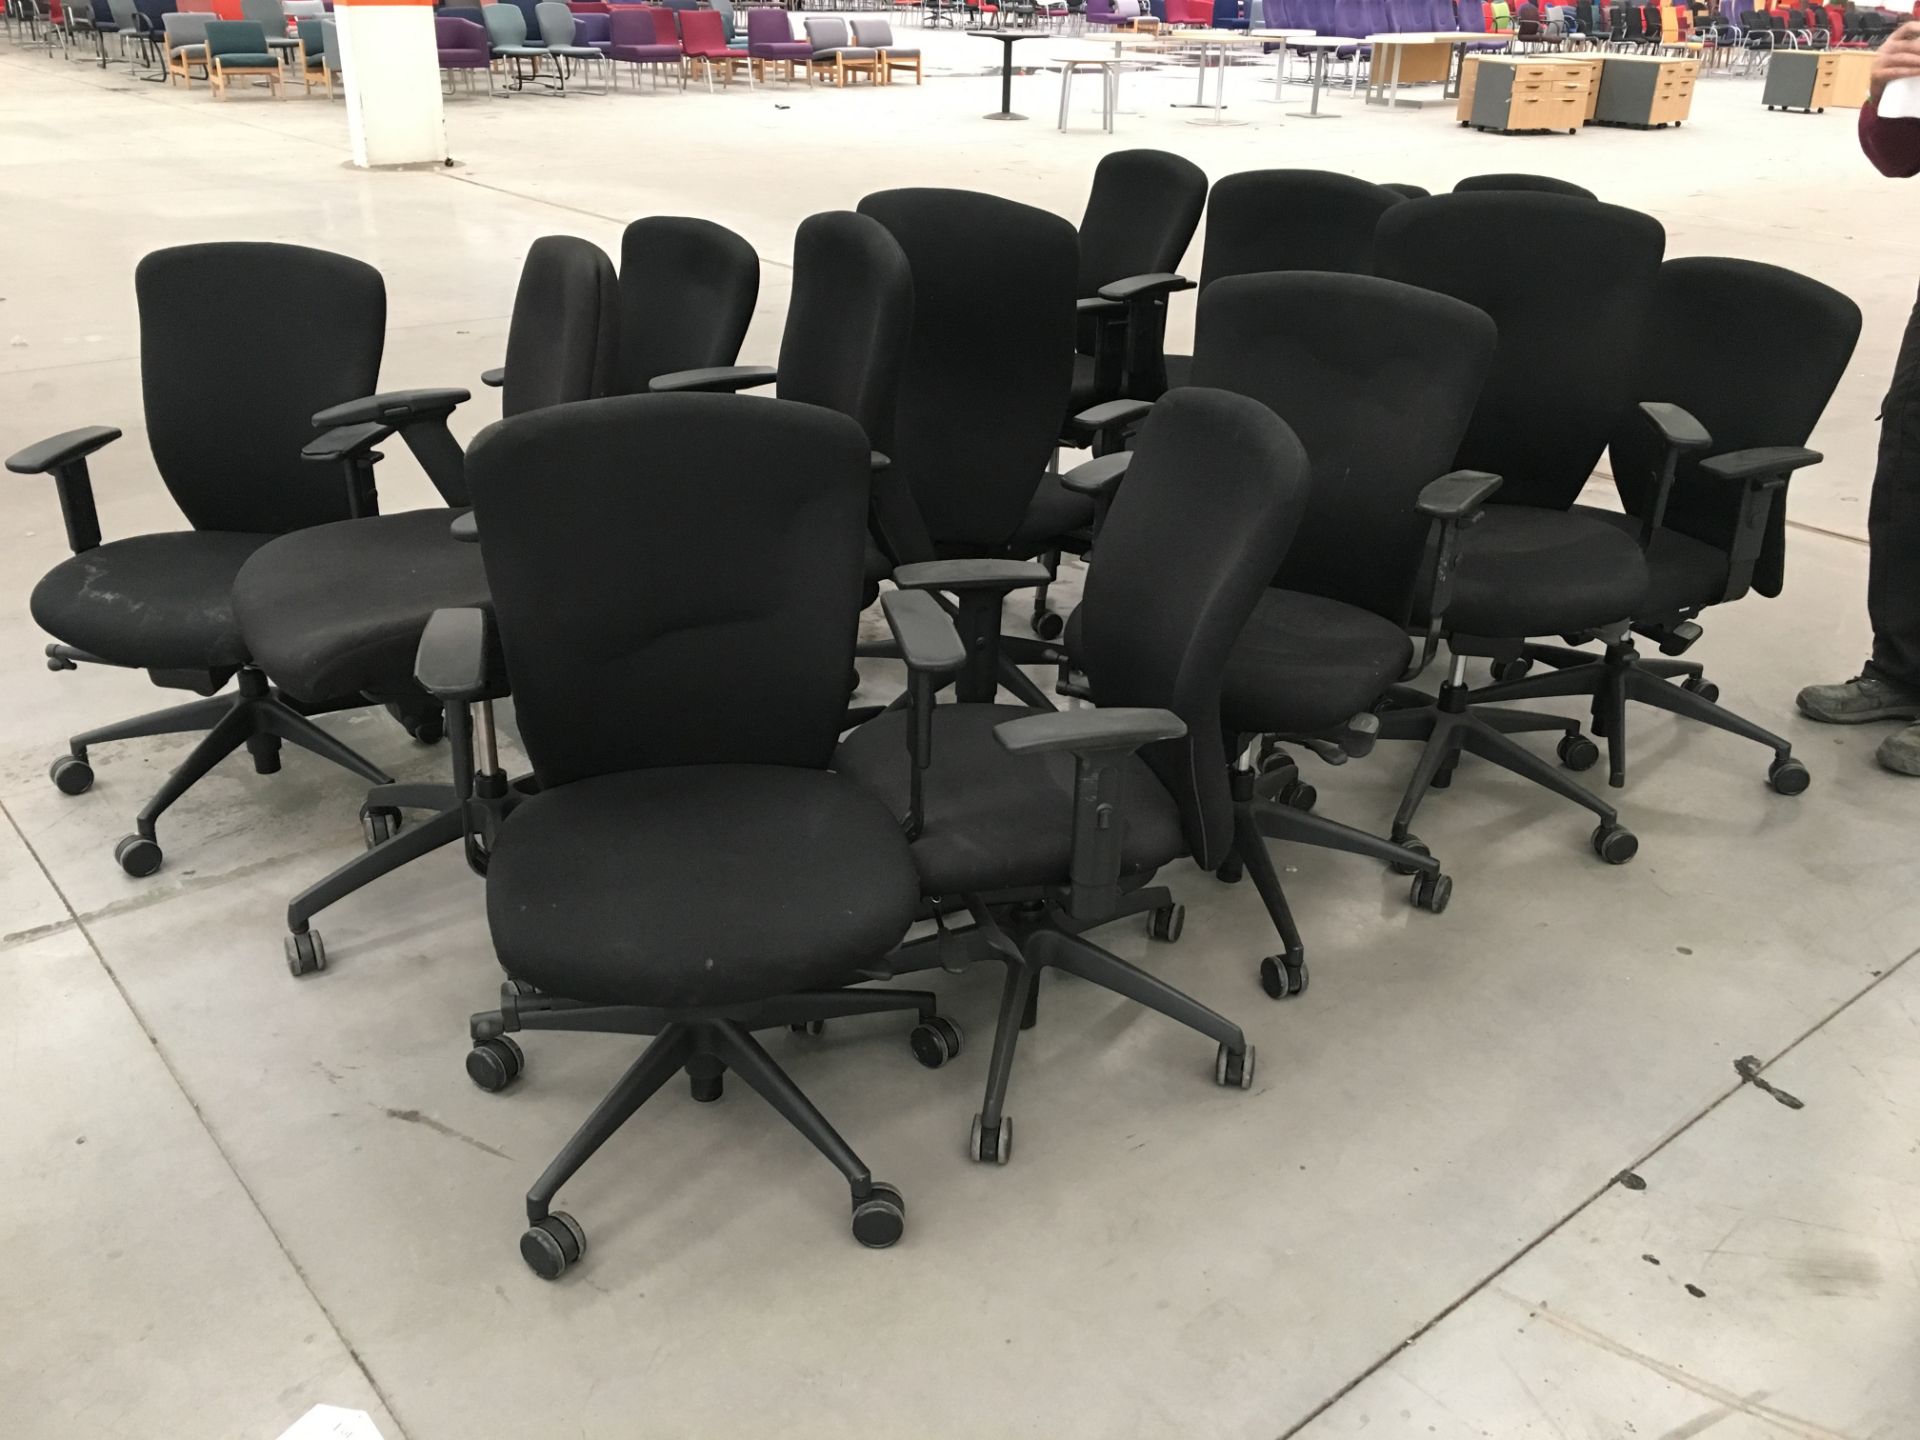 16 x Height adjustable typist chairs with arms